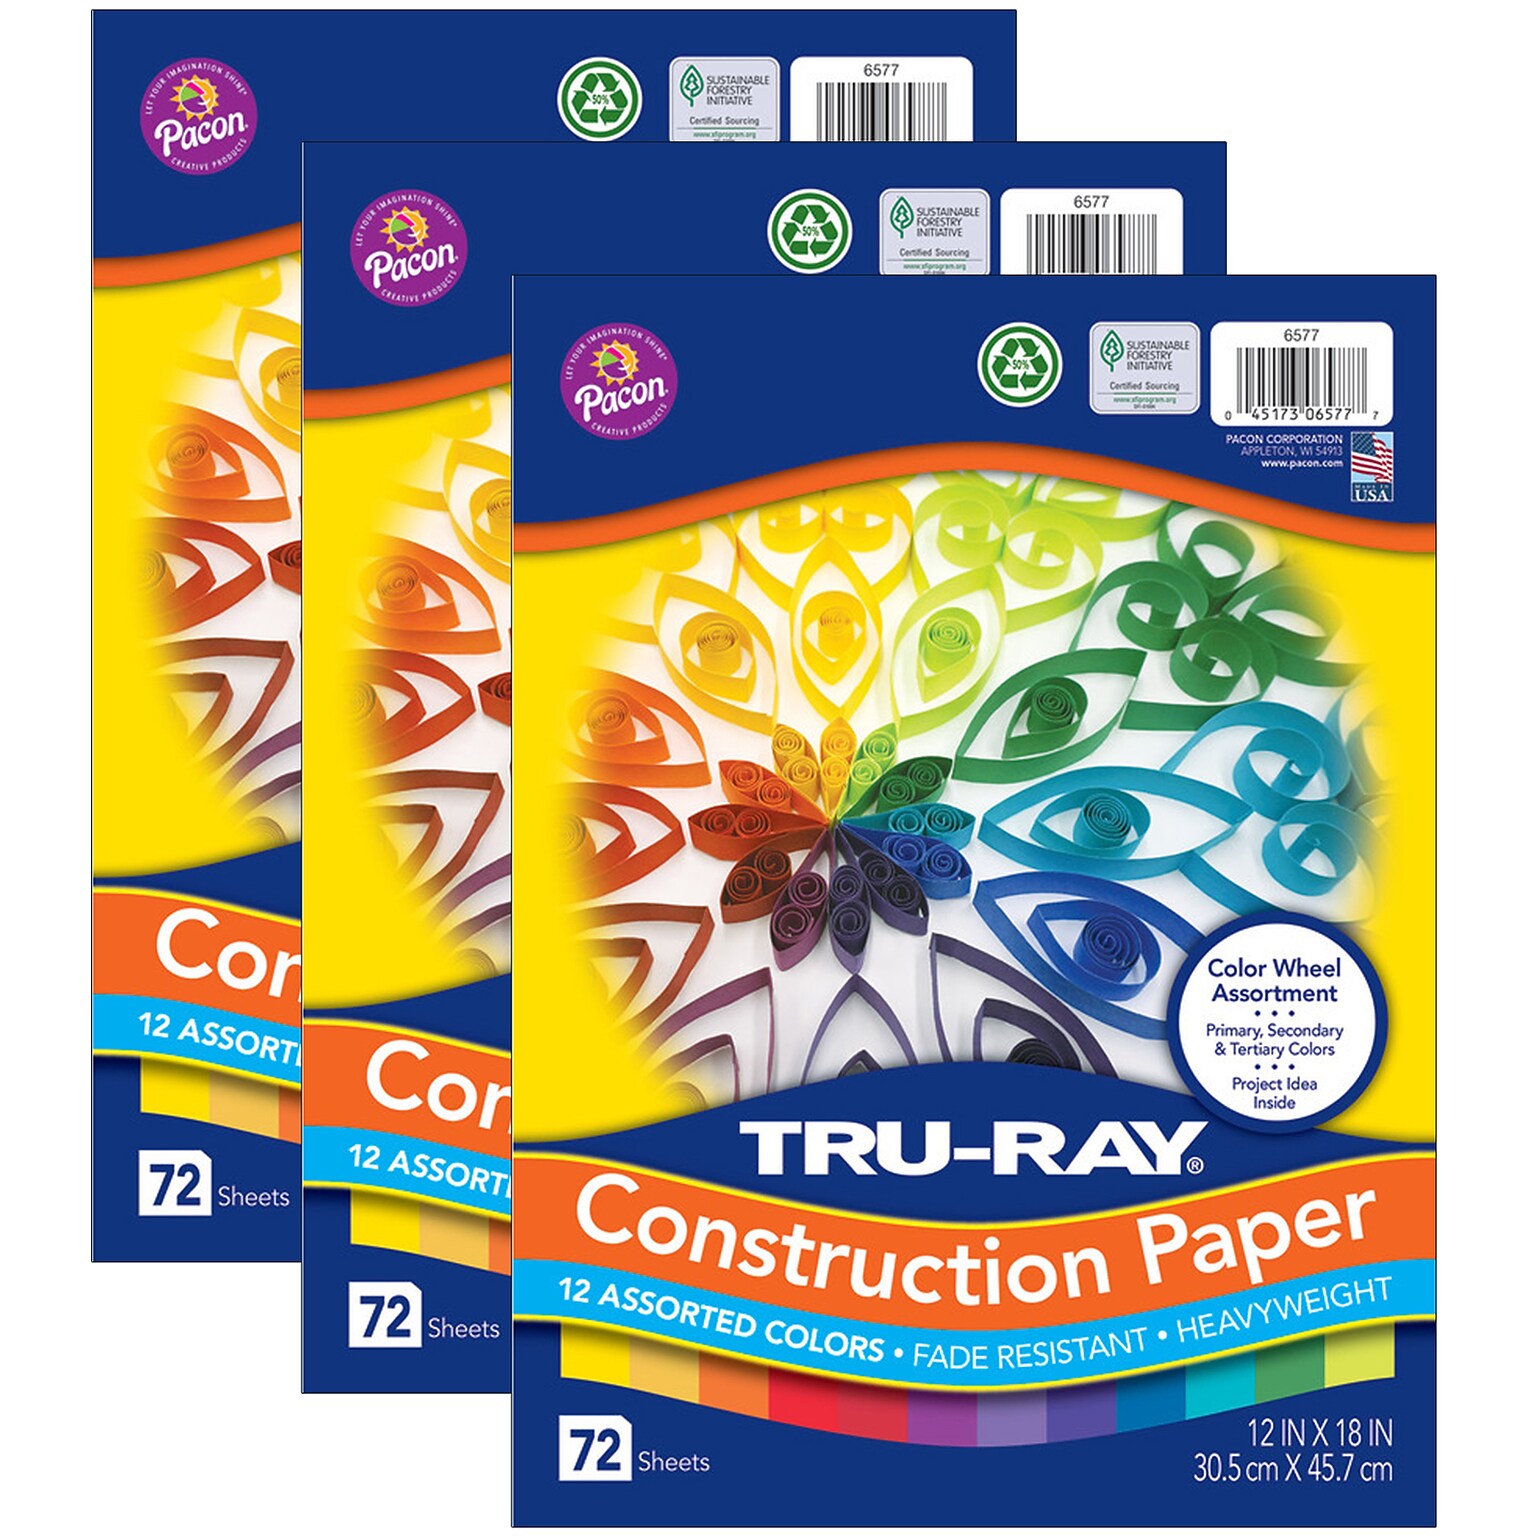 Tru-Ray Color Wheel Assortment 12 x 18 Construction Paper, Assorted, 72 Sheets/Pack, 3 Packs/Bundle (PAC6577-3)